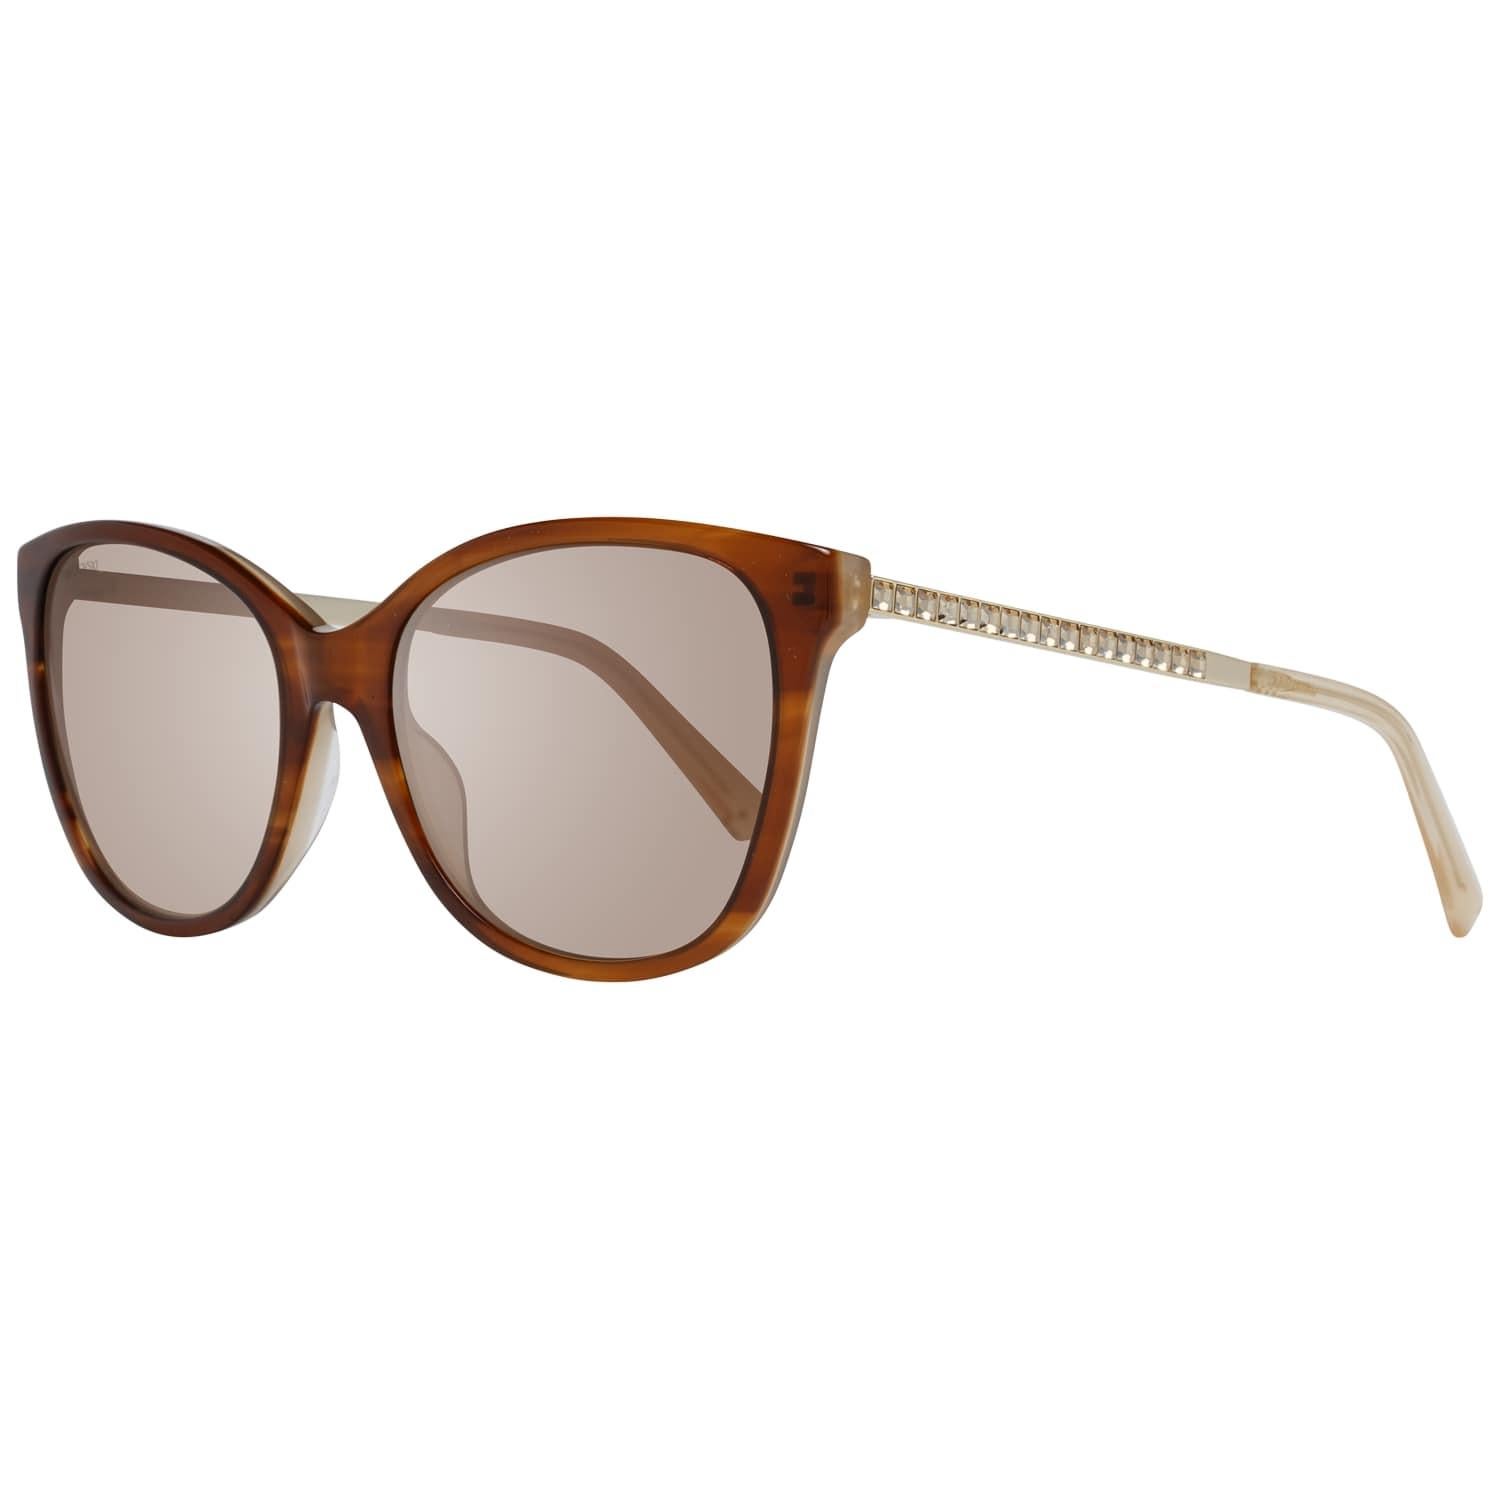 DetailsMATERIAL: AcetateCOLOR: BrownMODEL: SK0218 5647FGENDER: WomenCOUNTRY OF MANUFACTURE: ChinaTYPE: SunglassesORIGINAL CASE?: YesSTYLE: OvalOCCASION: CasualFEATURES: LightweightLENS COLOR: BrownLENS TECHNOLOGY: GradientYEAR MANUFACTURED: